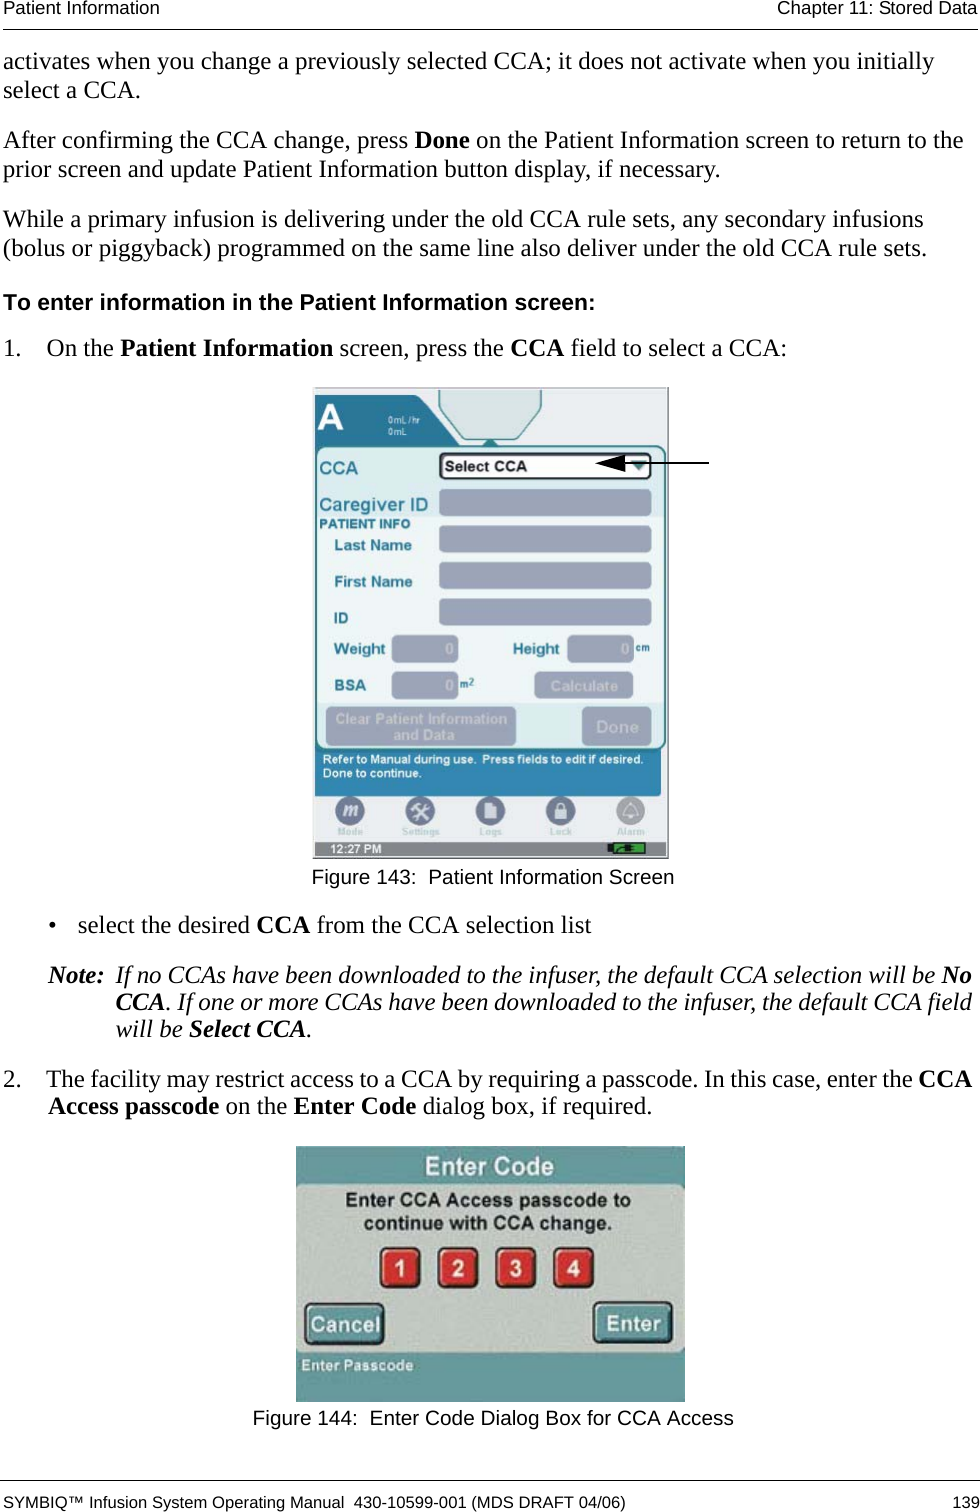 Patient Information Chapter 11: Stored Data SYMBIQ™ Infusion System Operating Manual  430-10599-001 (MDS DRAFT 04/06) 139activates when you change a previously selected CCA; it does not activate when you initially select a CCA.After confirming the CCA change, press Done on the Patient Information screen to return to the prior screen and update Patient Information button display, if necessary.While a primary infusion is delivering under the old CCA rule sets, any secondary infusions (bolus or piggyback) programmed on the same line also deliver under the old CCA rule sets. To enter information in the Patient Information screen:1.  On the Patient Information screen, press the CCA field to select a CCA:  Figure 143:  Patient Information Screen• select the desired CCA from the CCA selection listNote: If no CCAs have been downloaded to the infuser, the default CCA selection will be No CCA. If one or more CCAs have been downloaded to the infuser, the default CCA field will be Select CCA.2.  The facility may restrict access to a CCA by requiring a passcode. In this case, enter the CCA Access passcode on the Enter Code dialog box, if required. Figure 144:  Enter Code Dialog Box for CCA Access